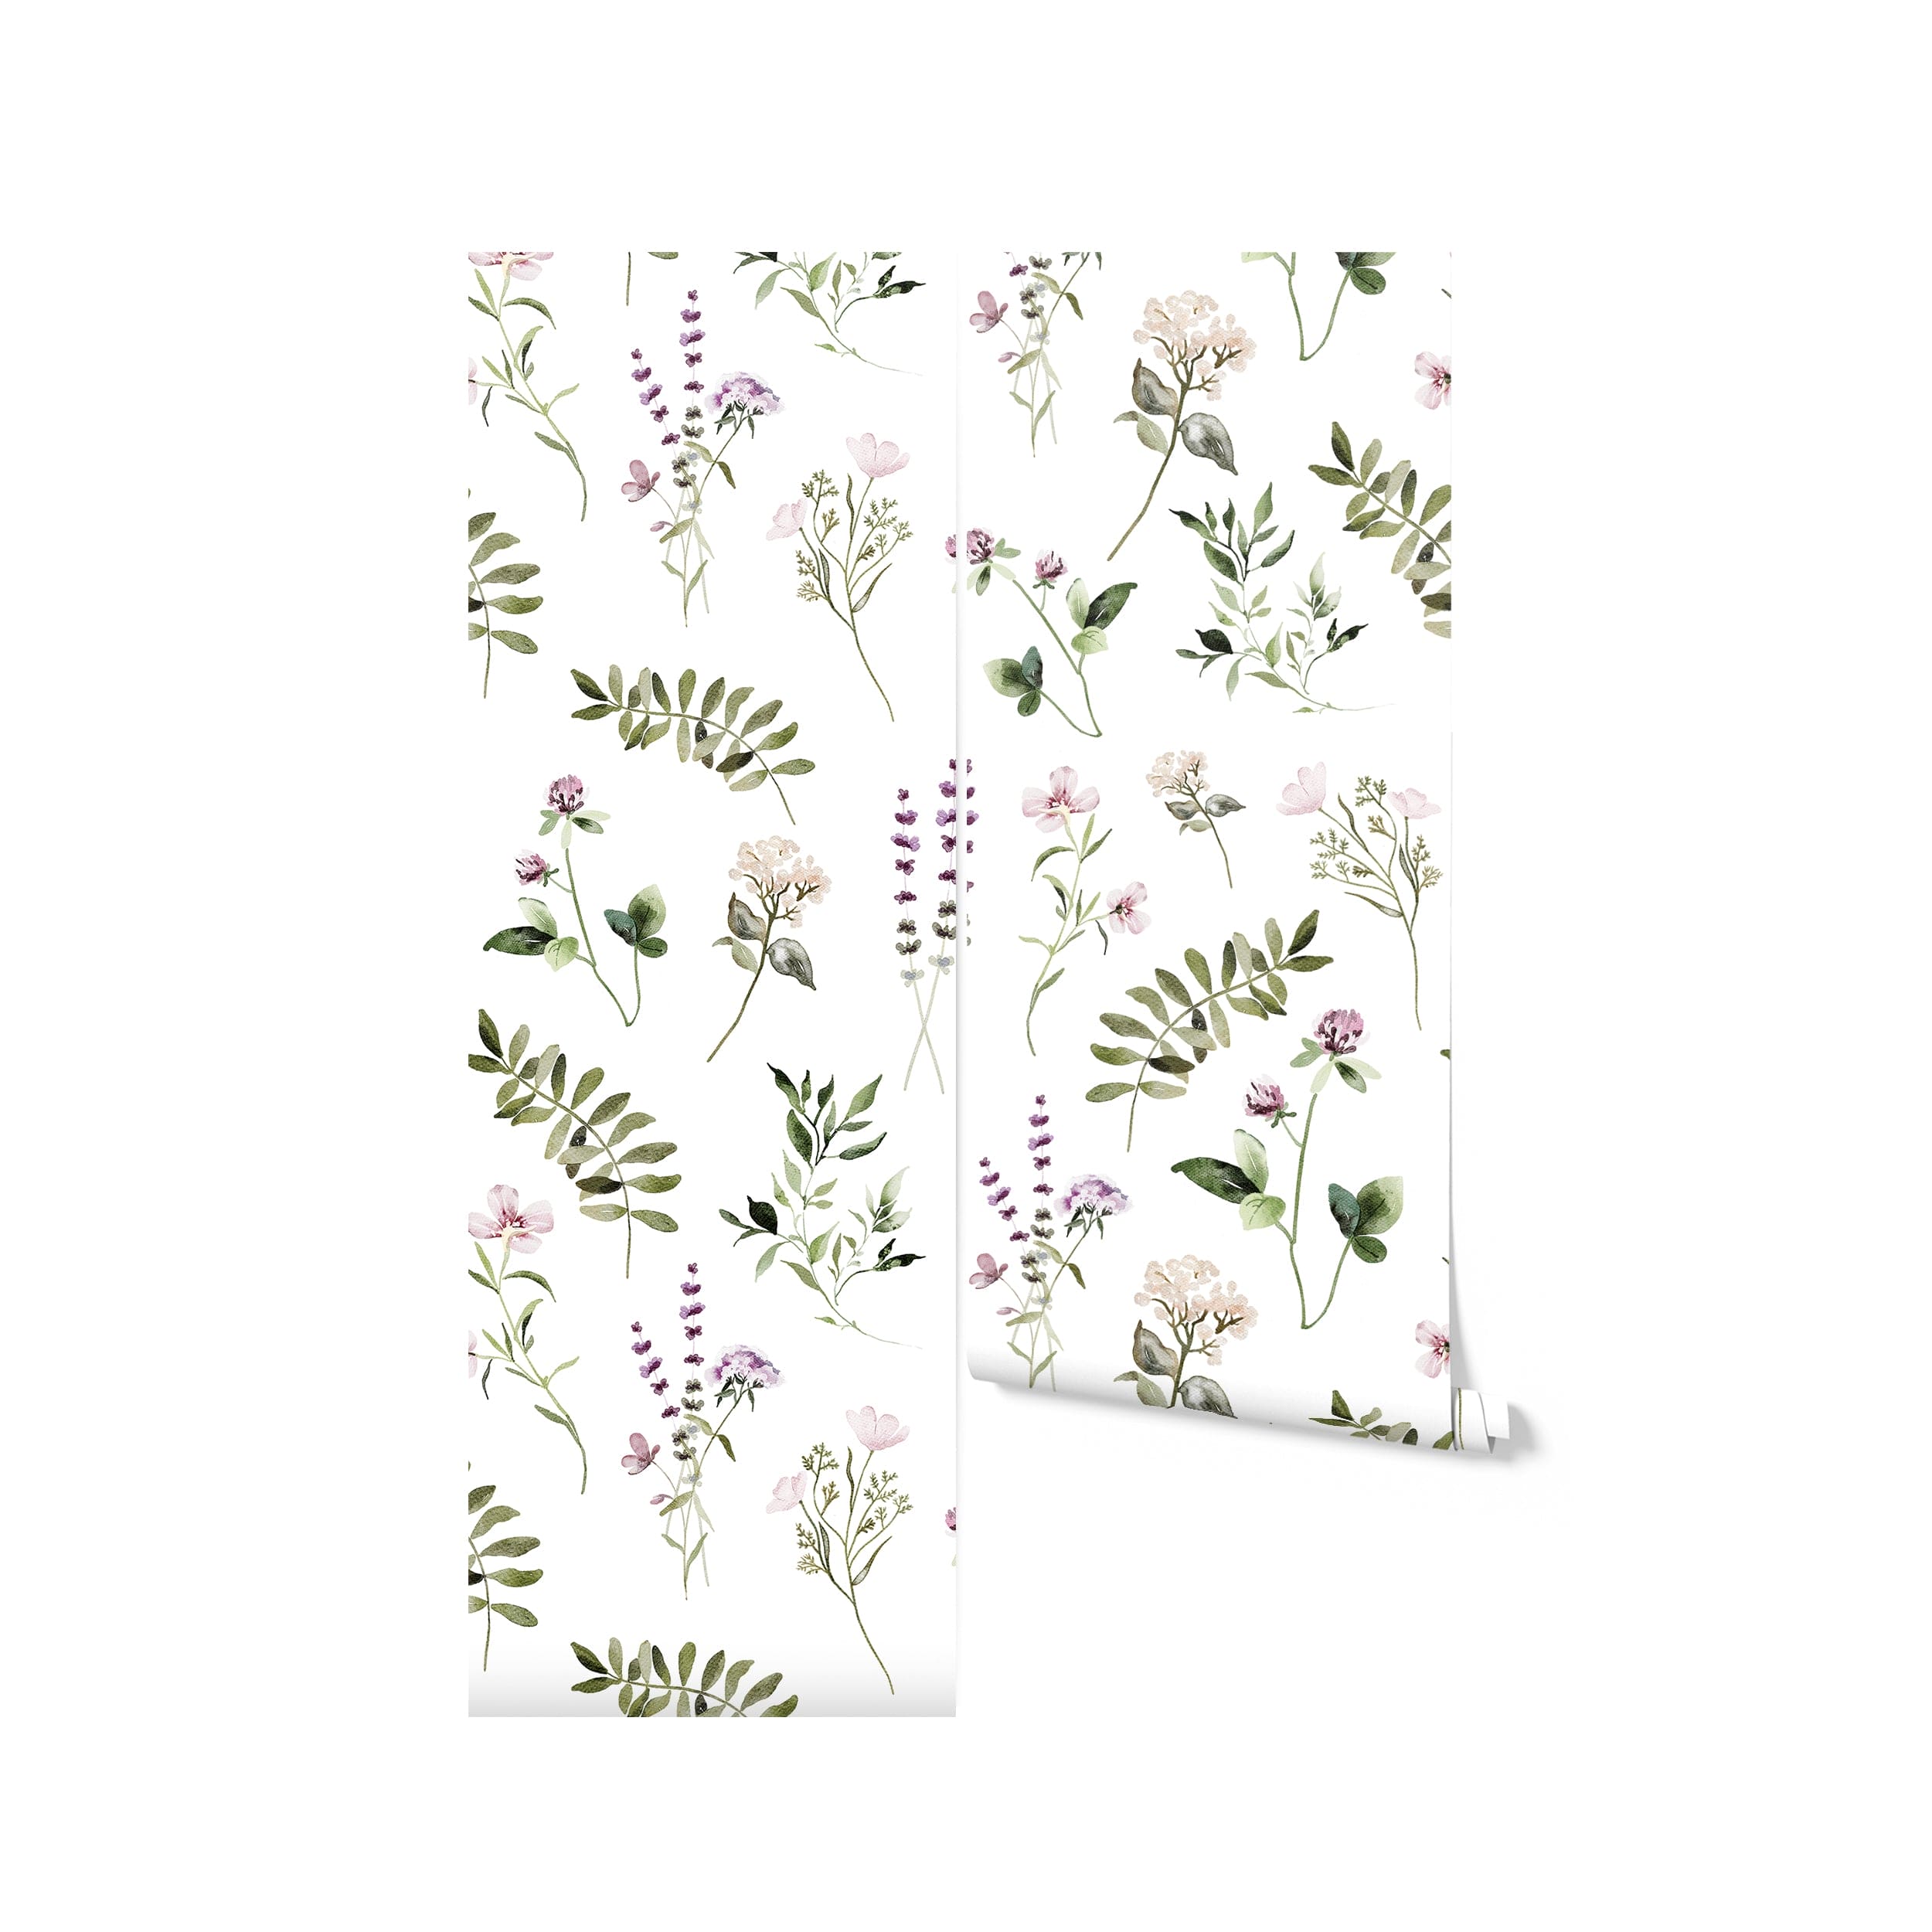 A roll of "Midsummer Watercolour Floral & Fern Wallpaper" displayed against a plain background. The wallpaper features beautifully detailed wildflowers and greenery in watercolor style, ideal for bringing a piece of the tranquil outdoors into home interiors.